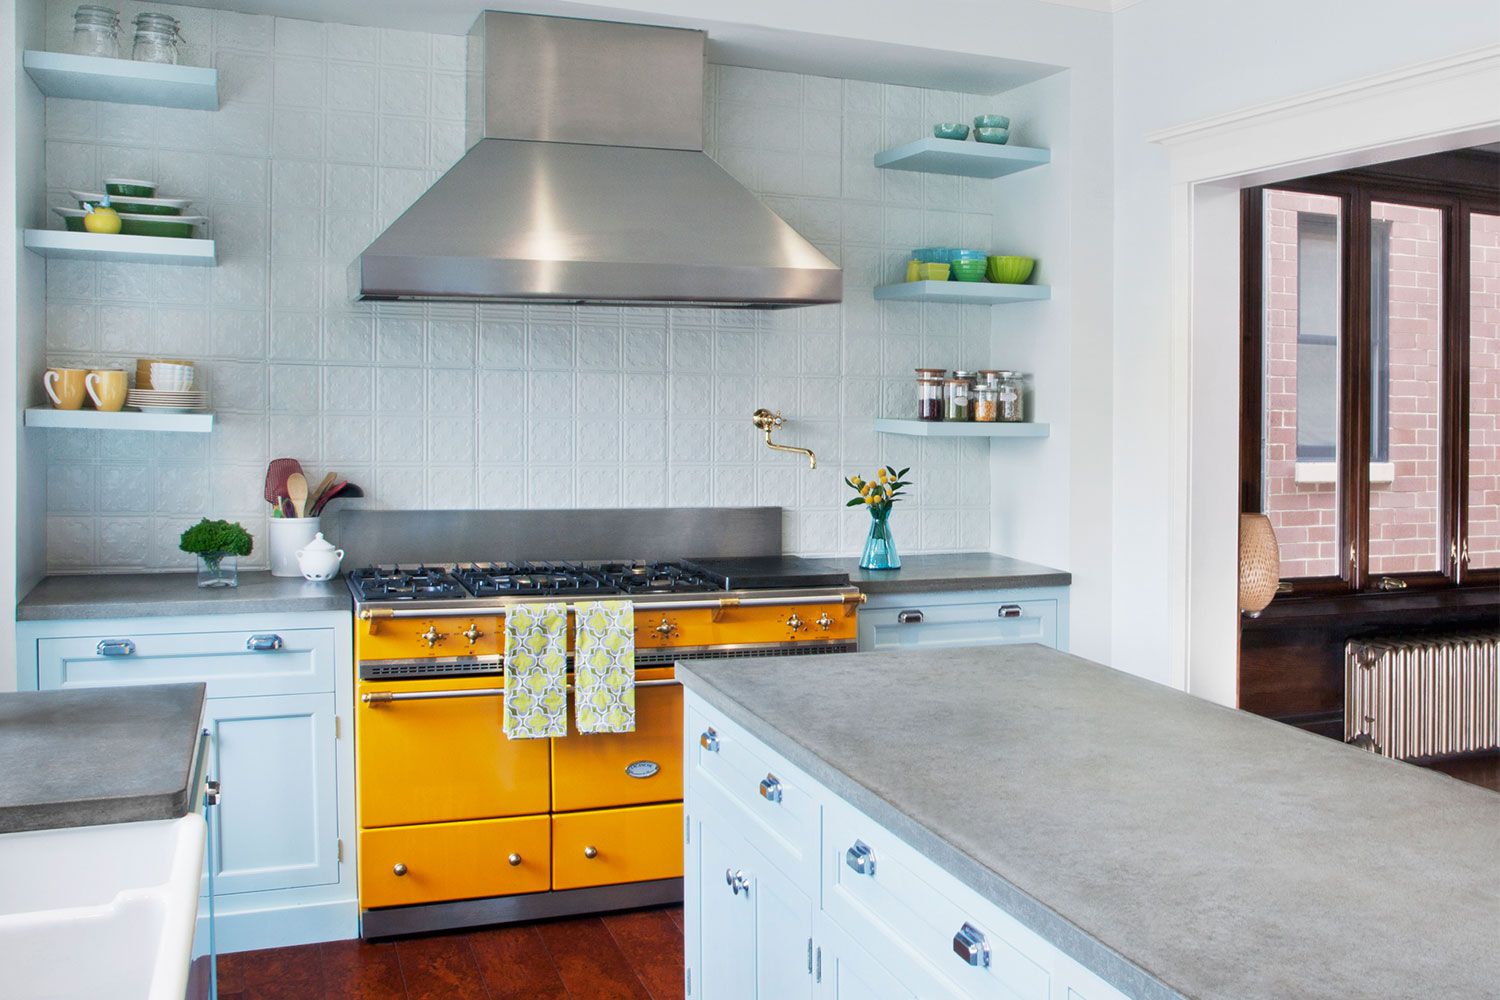 21 Yellow Kitchen Ideas - Decorating Tips for Yellow Colored Kitchens